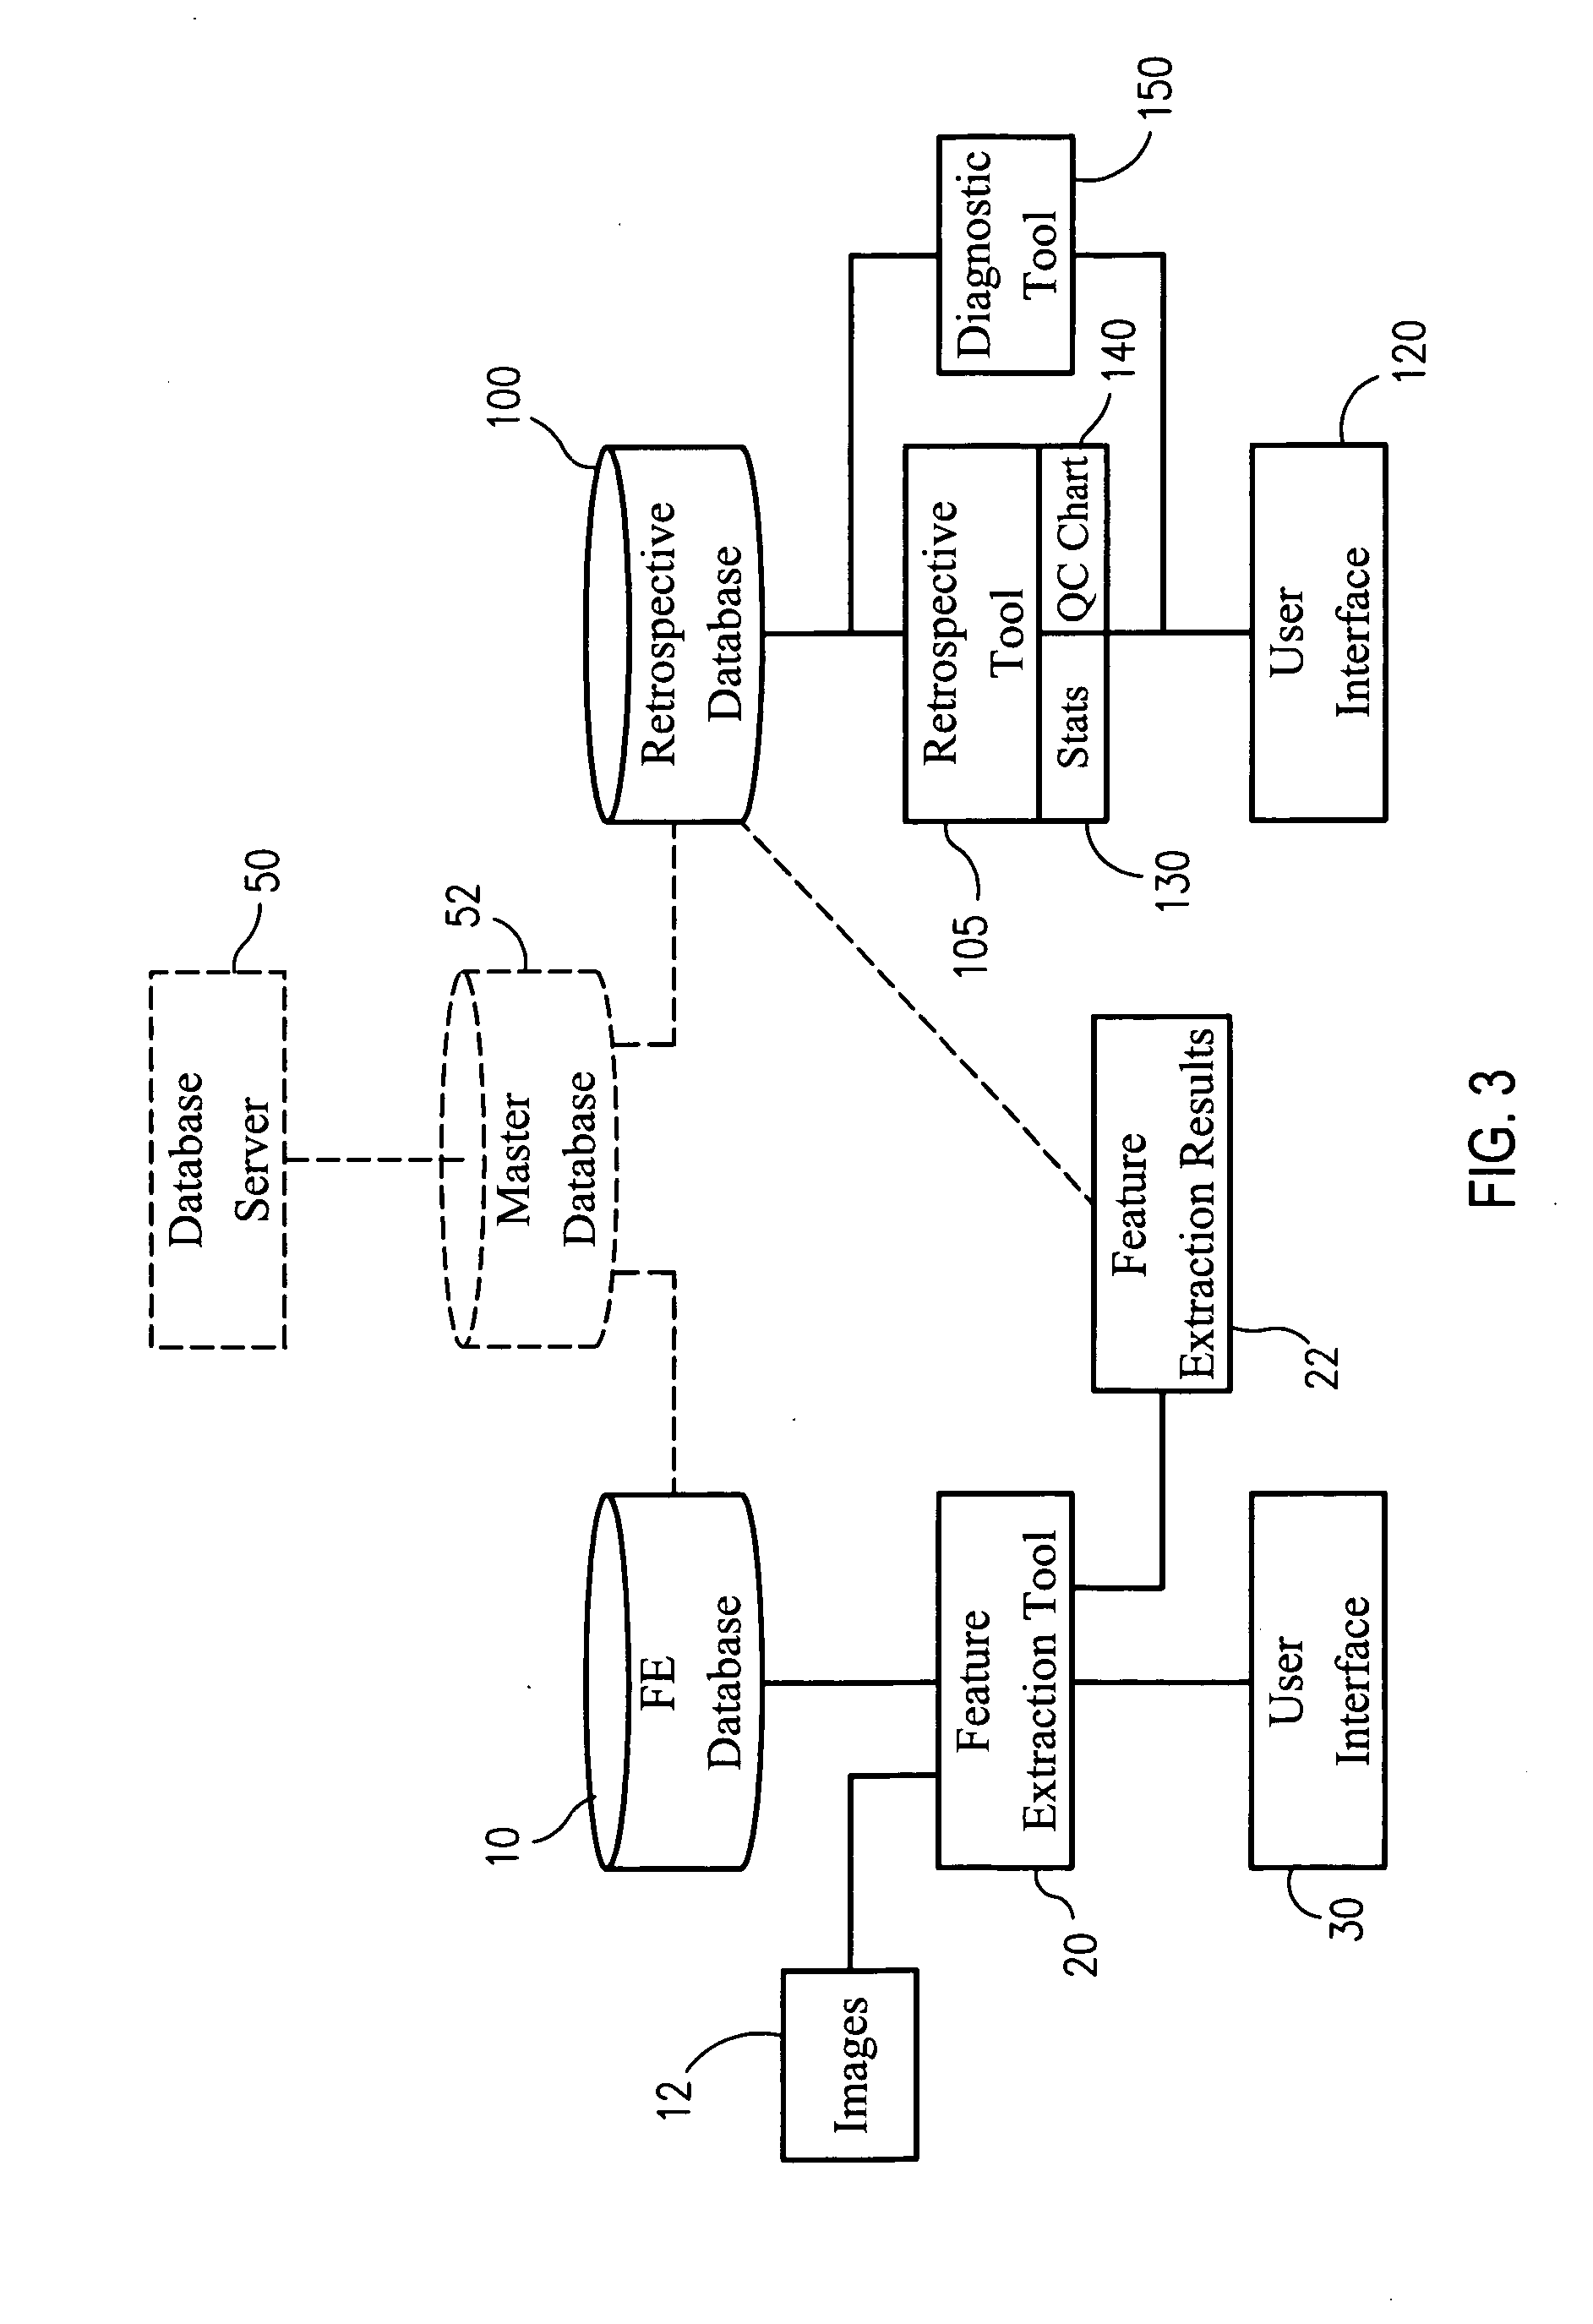 Methods and systems for facilitating analysis of feature extraction outputs